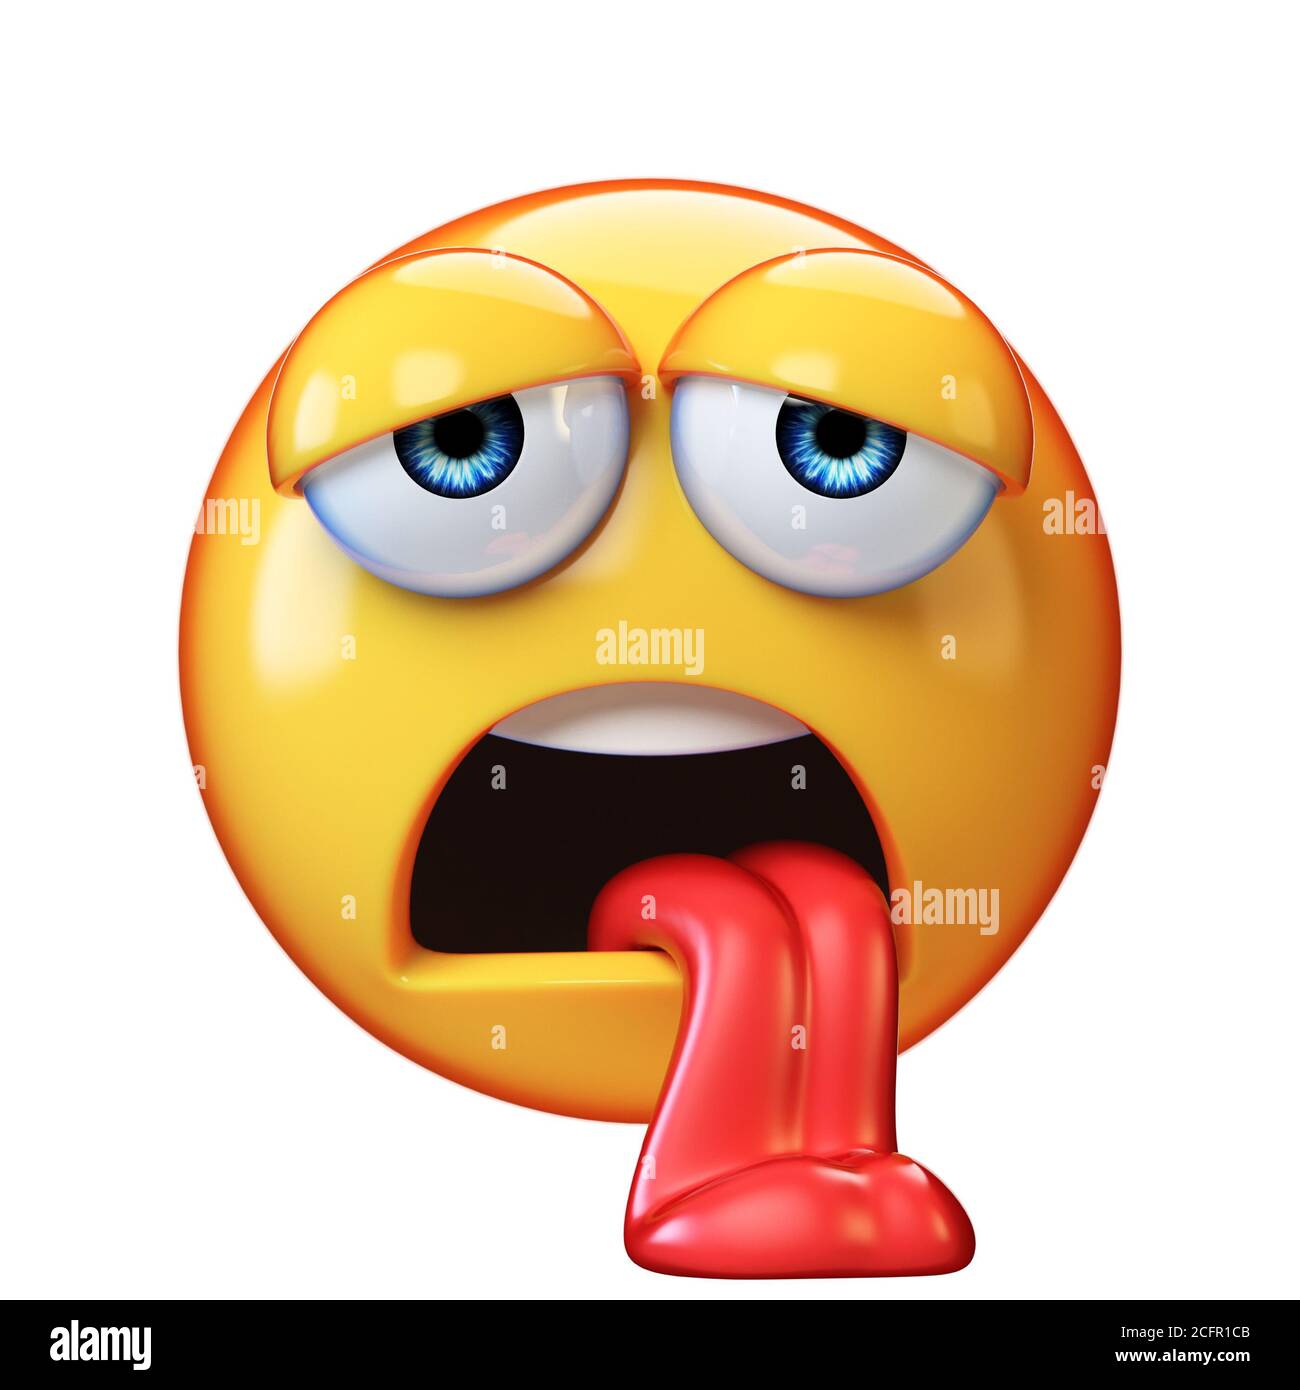 Exhausted emoji isolated on white background, tired emoticon 3d rendering Stock Photo